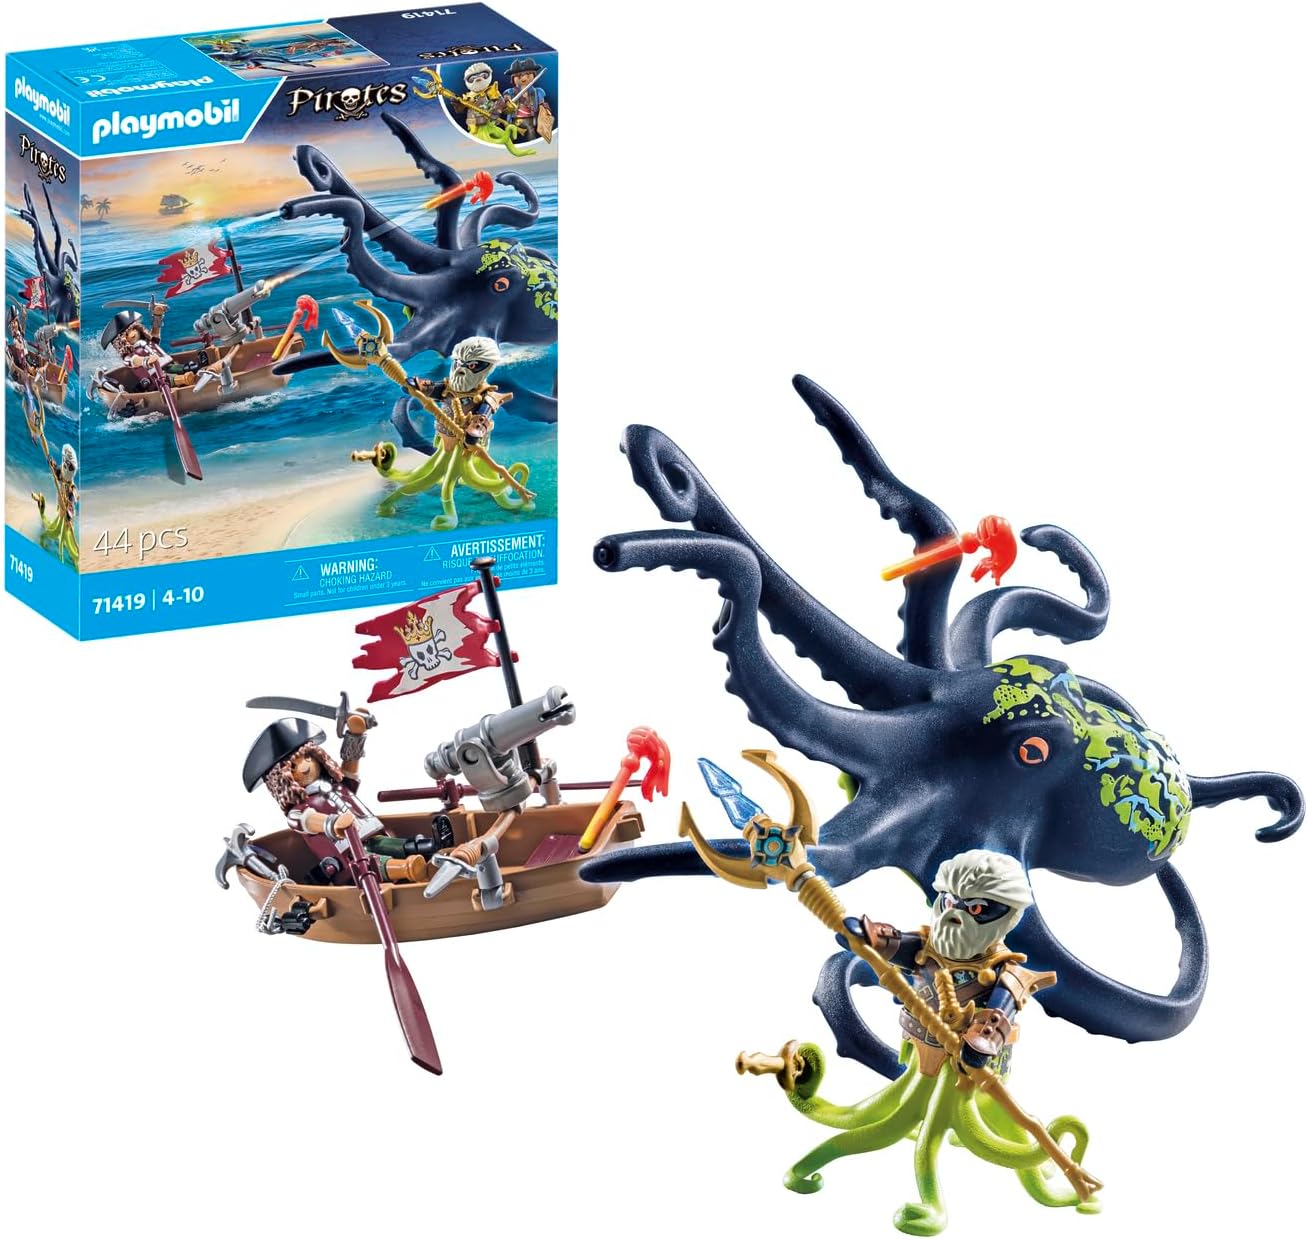 Playmobil Pirates 71419 Fight Against The Giant Octopus, Deepers Against Pirates, Large Octopus With Real Water Spray Function and Extensive Accessories, Toy for Children from 4 Years